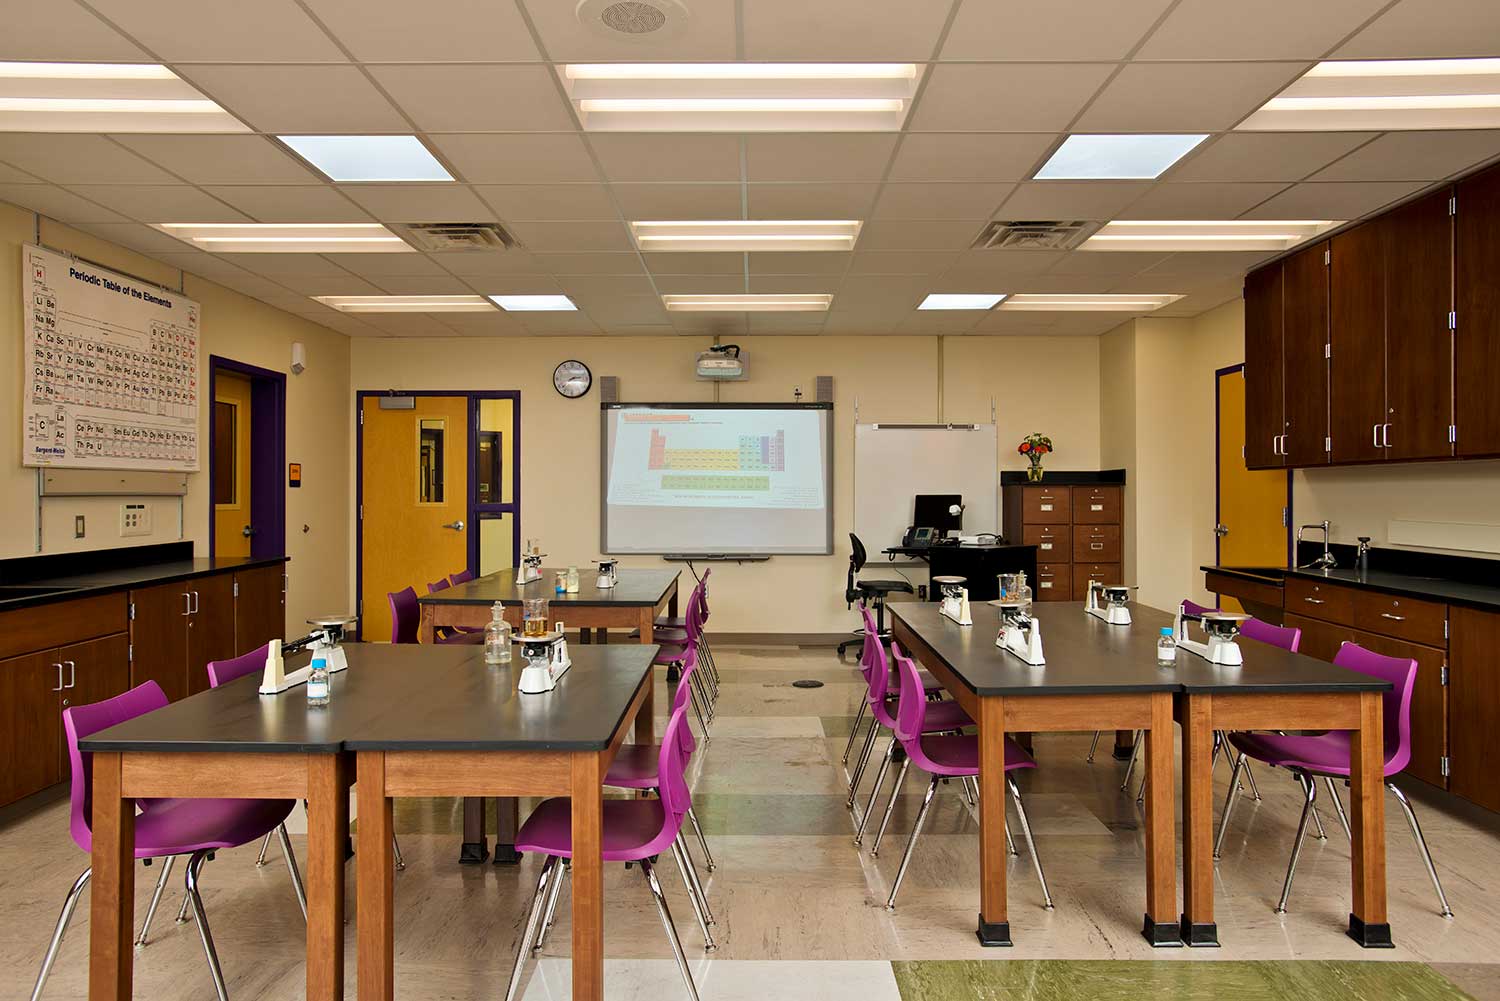 Science labs at the Troy Middle School include the latest technology and flexible design for teaching and experimentation.